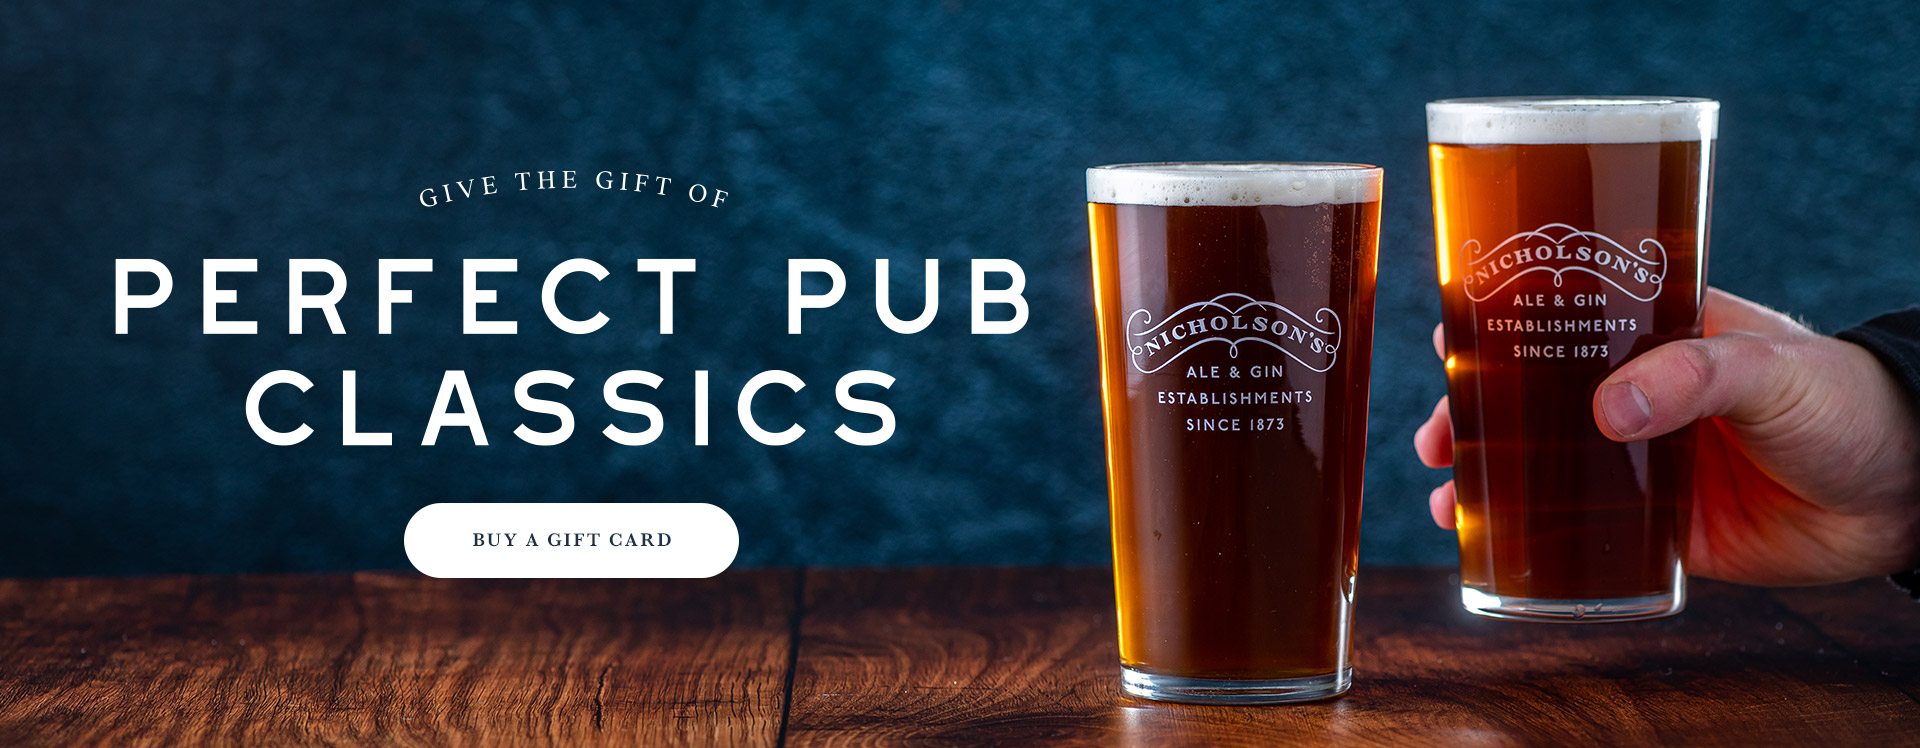 Nicholson’s Pub Gift Voucher at The Crooked Billet in Leigh-On-Sea